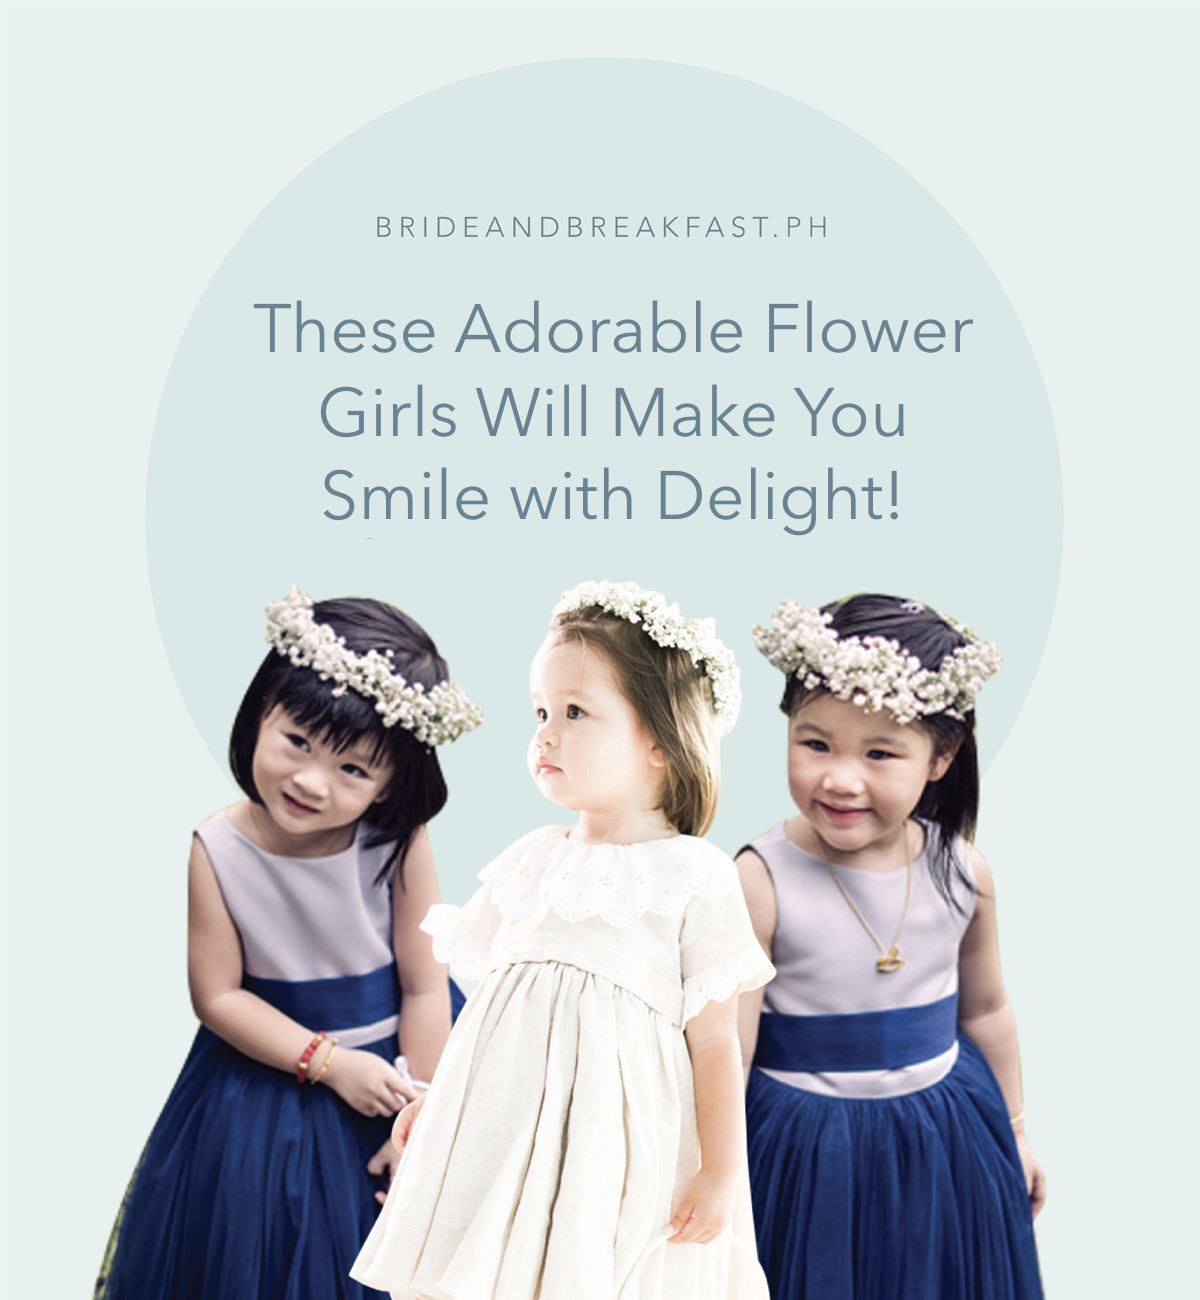 These Adorable Flower Girls Will Make You Smile with Delight!